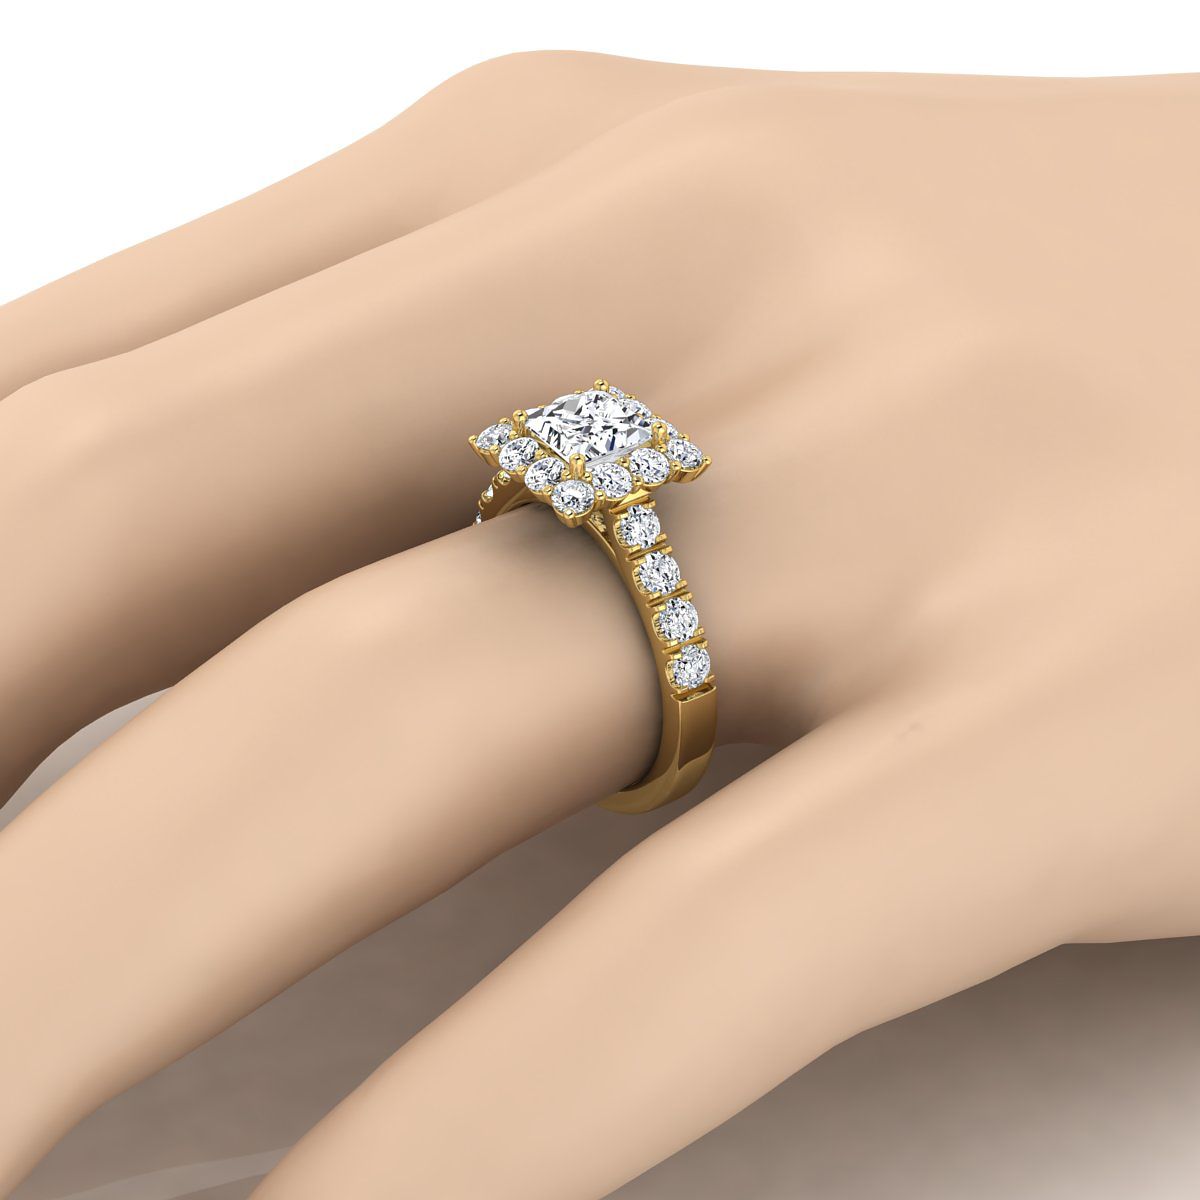 18K Yellow Gold Princess Cut Diamond Luxe Style French Pave Halo Engagement Ring -1-1/10ctw